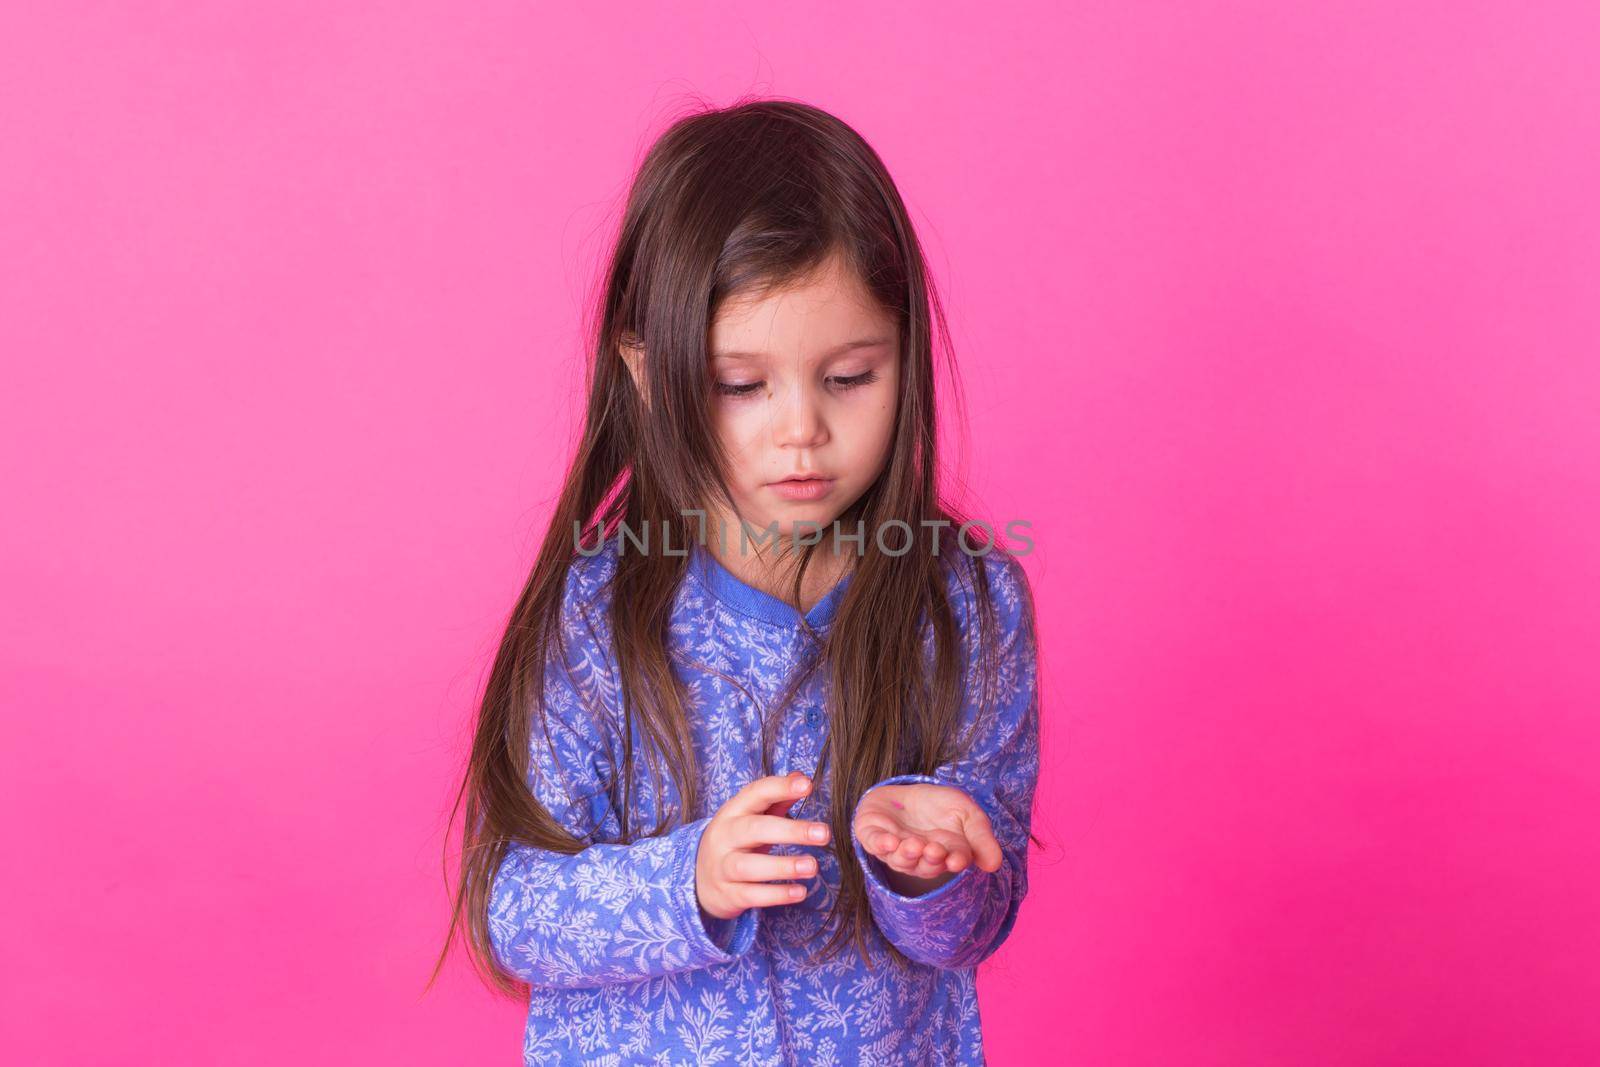 Pretty little girl on pink background by Satura86